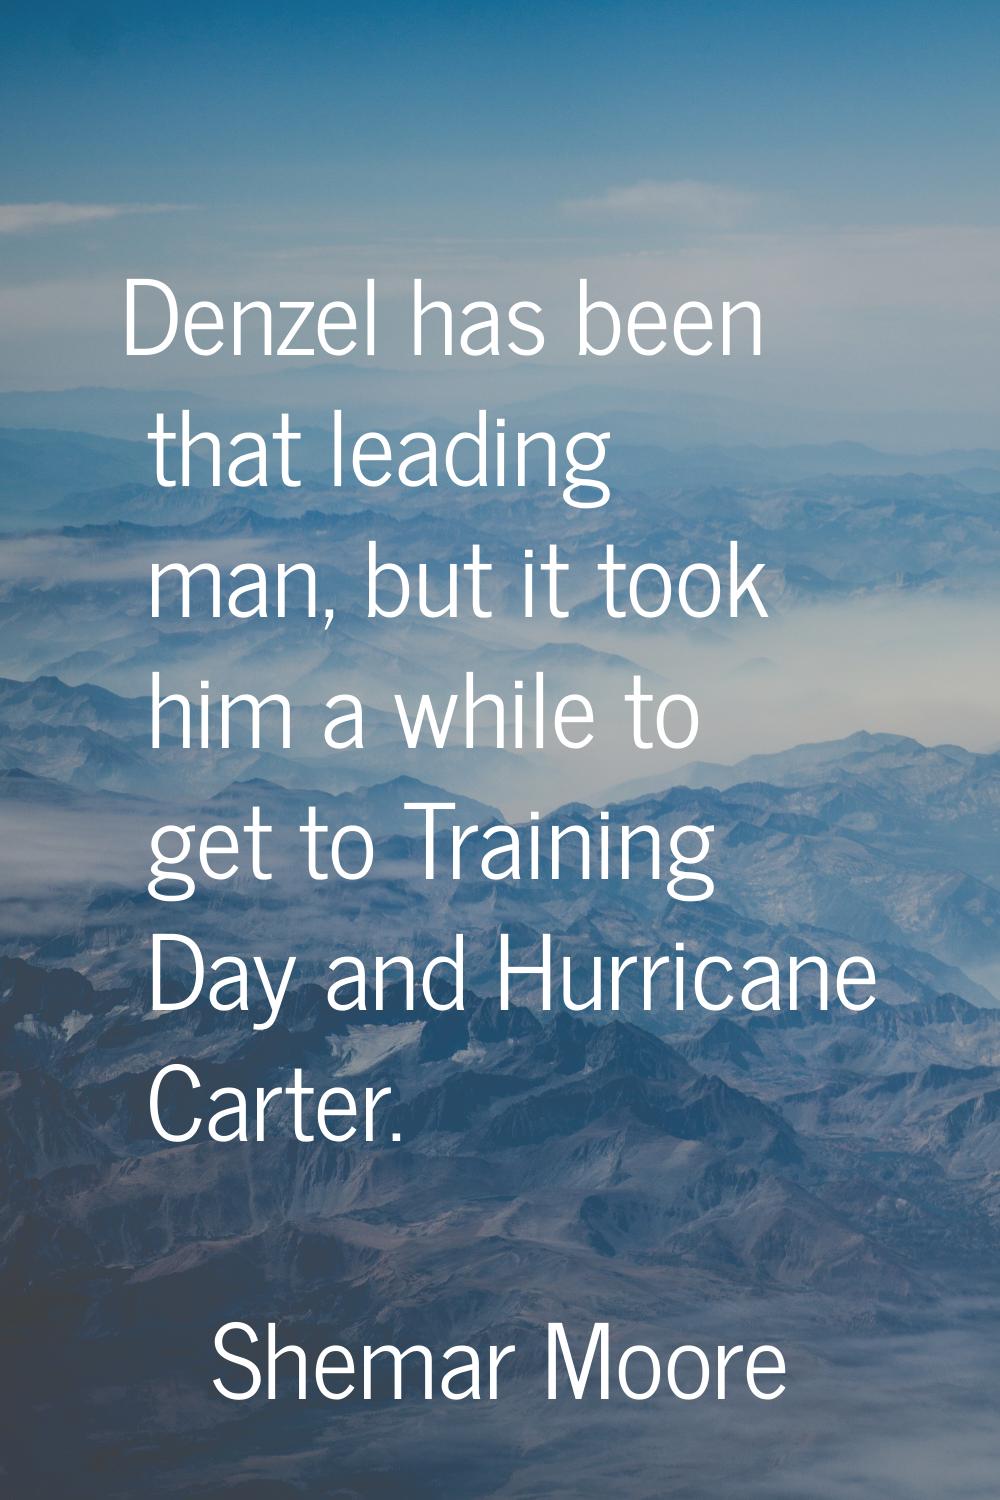 Denzel has been that leading man, but it took him a while to get to Training Day and Hurricane Cart